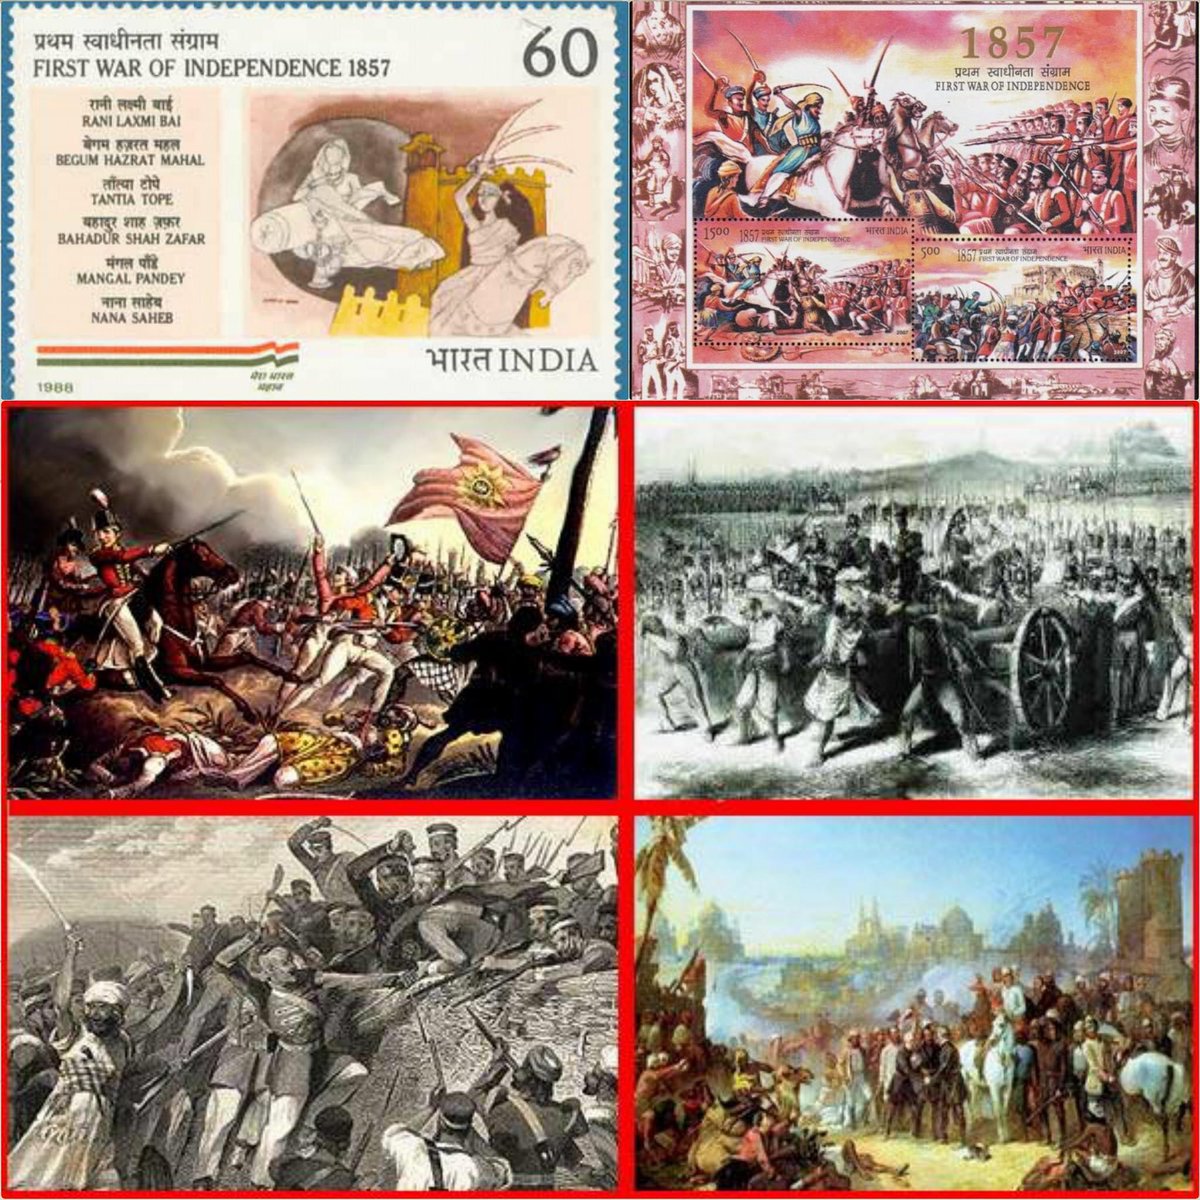 Today, the May 10 holds a special place in Indian history. In 1857, India's first freedom struggle started from Meerut this day. I pay my tributes and salute the brave martyrs. Jai Bharat.🙏 आज 10 मई का दिन भारतीय इतिहास में एक विशिष्ट स्थान रखता है।1857 में भारत का प्रथम…